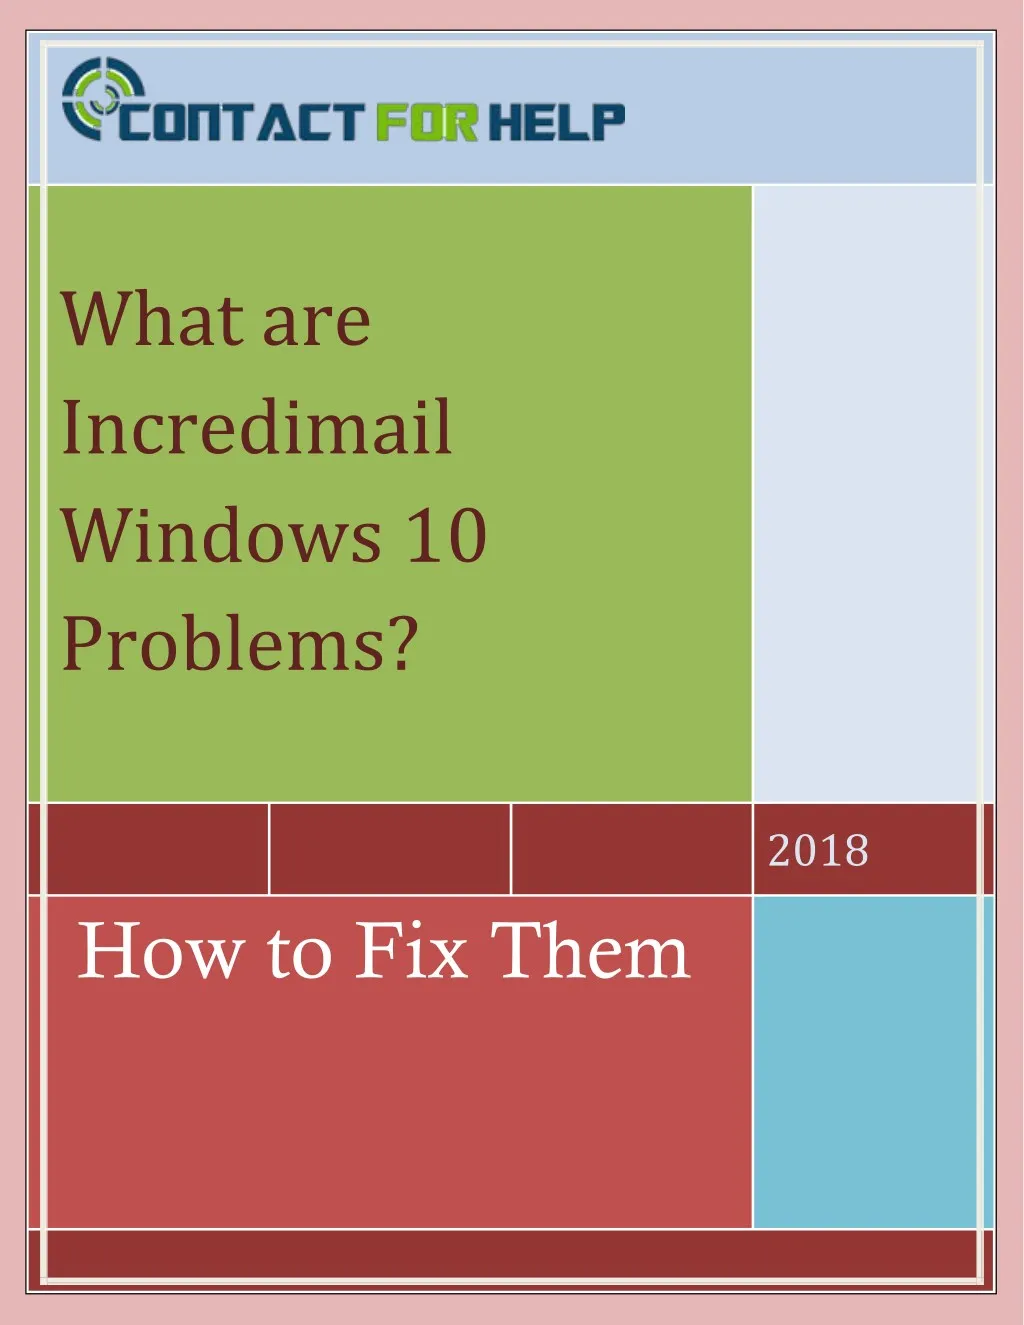 what are incredimail windows 10 problems